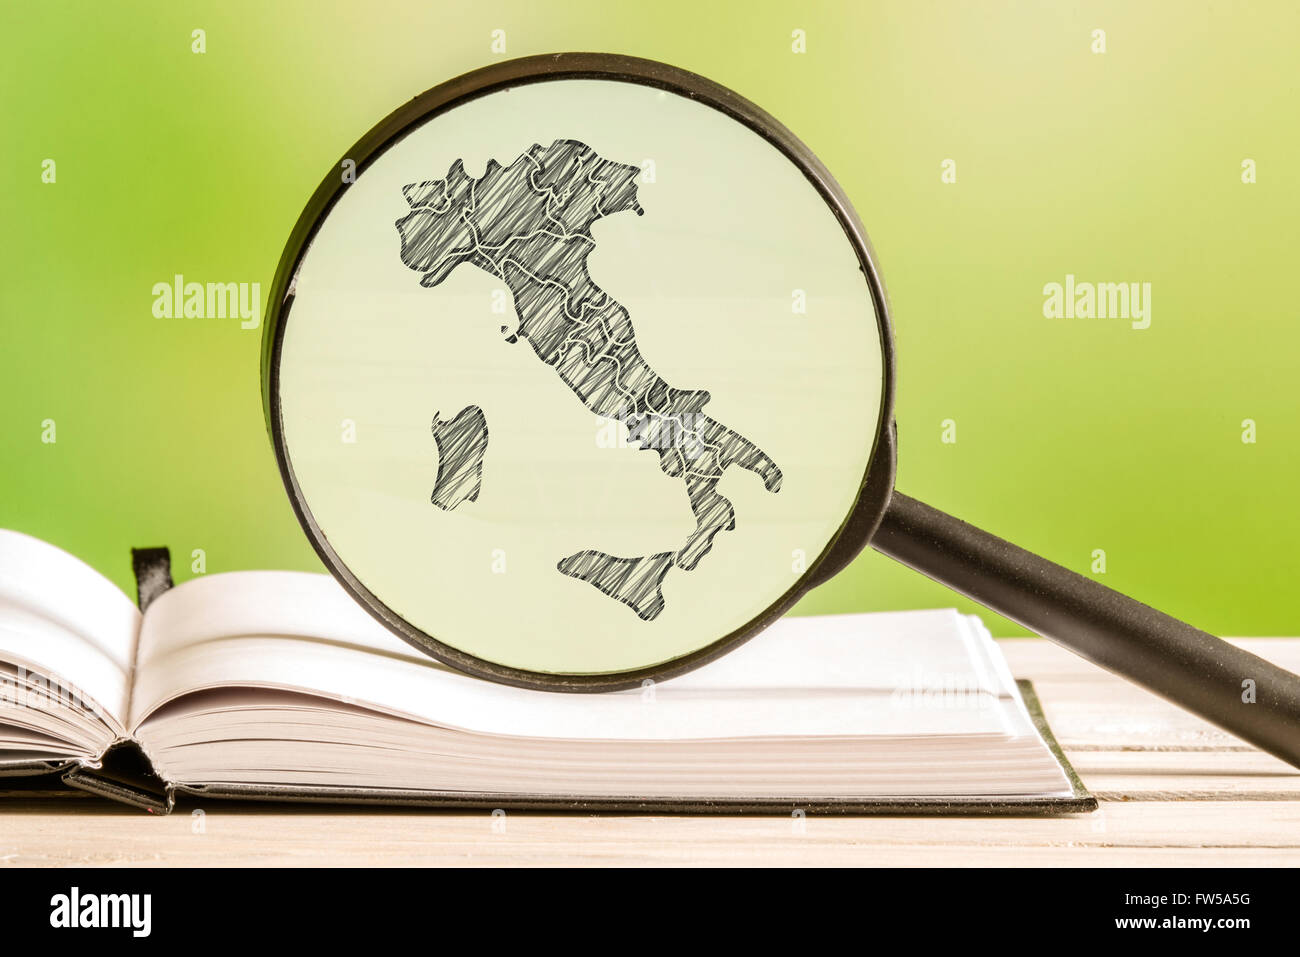 Italy with a pencil drawing of a italian map in a magnifying glass Stock Photo